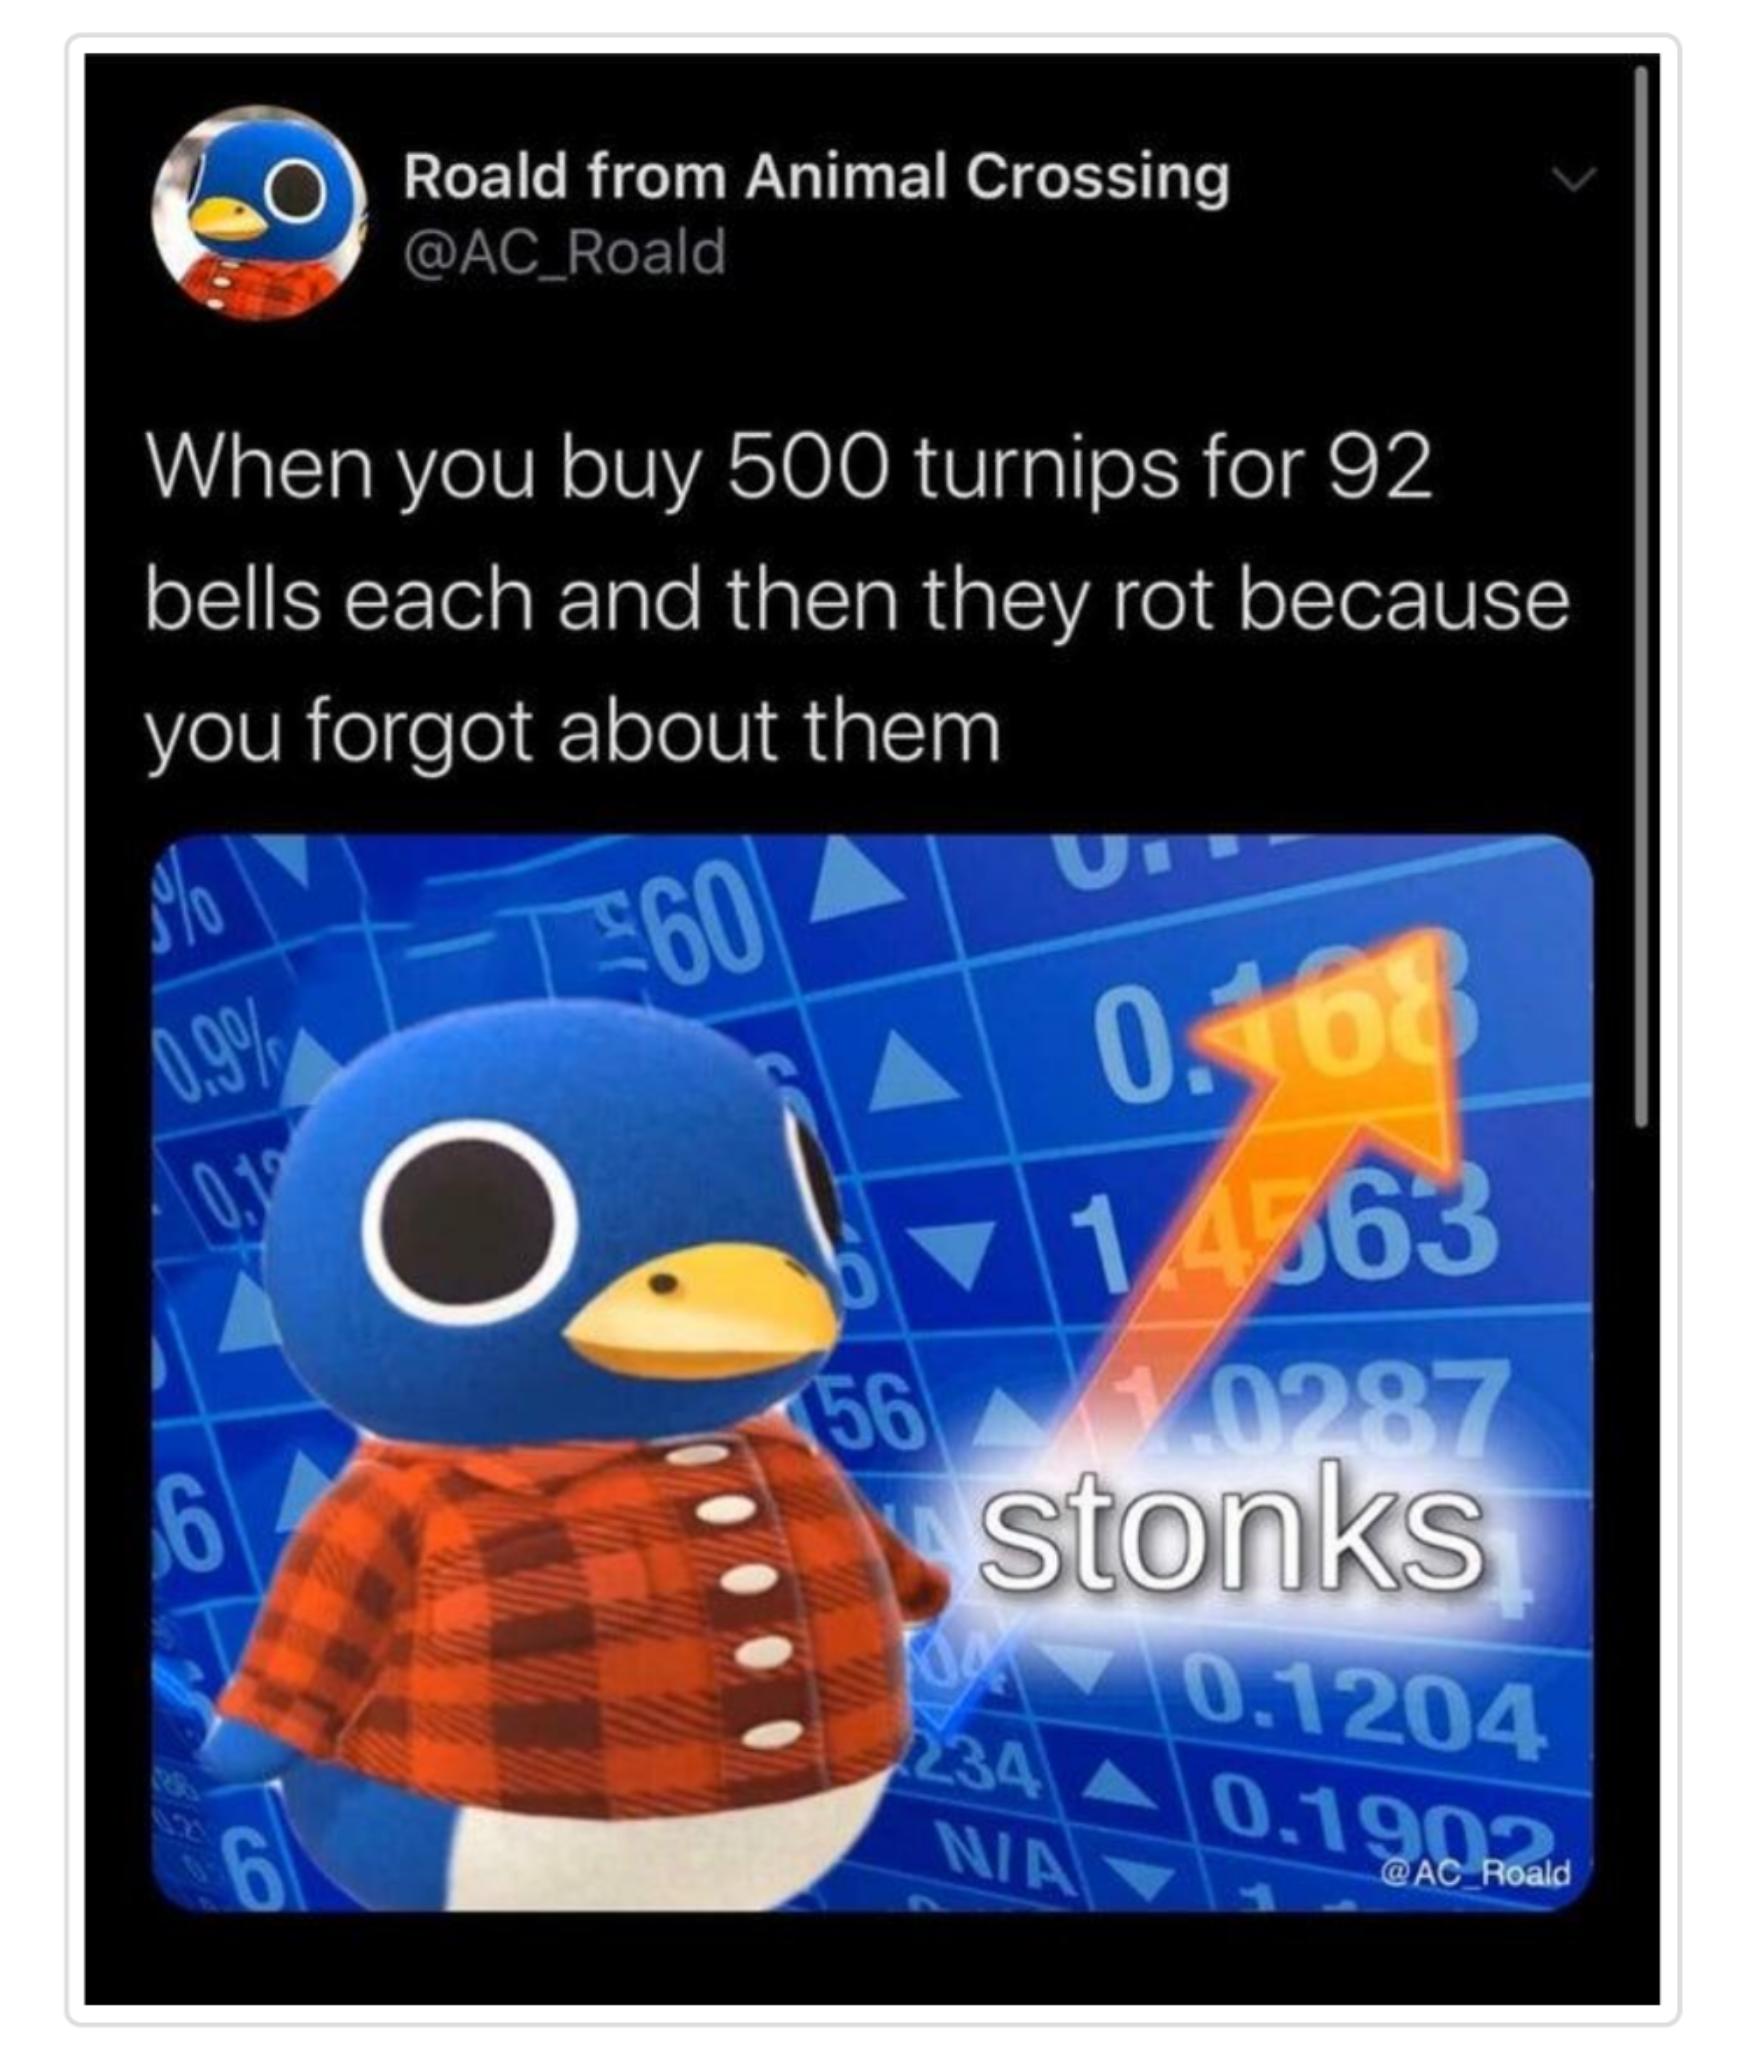 stonks meme - O Roald from Animal Crossing When you buy 500 turnips for 92 bells each and then they rot because you forgot about them 560 0.9% 0.39 A 0.468 1.4363 56 1,0287 stonks co 234 Nia 0.1204 0.1902 co Roald